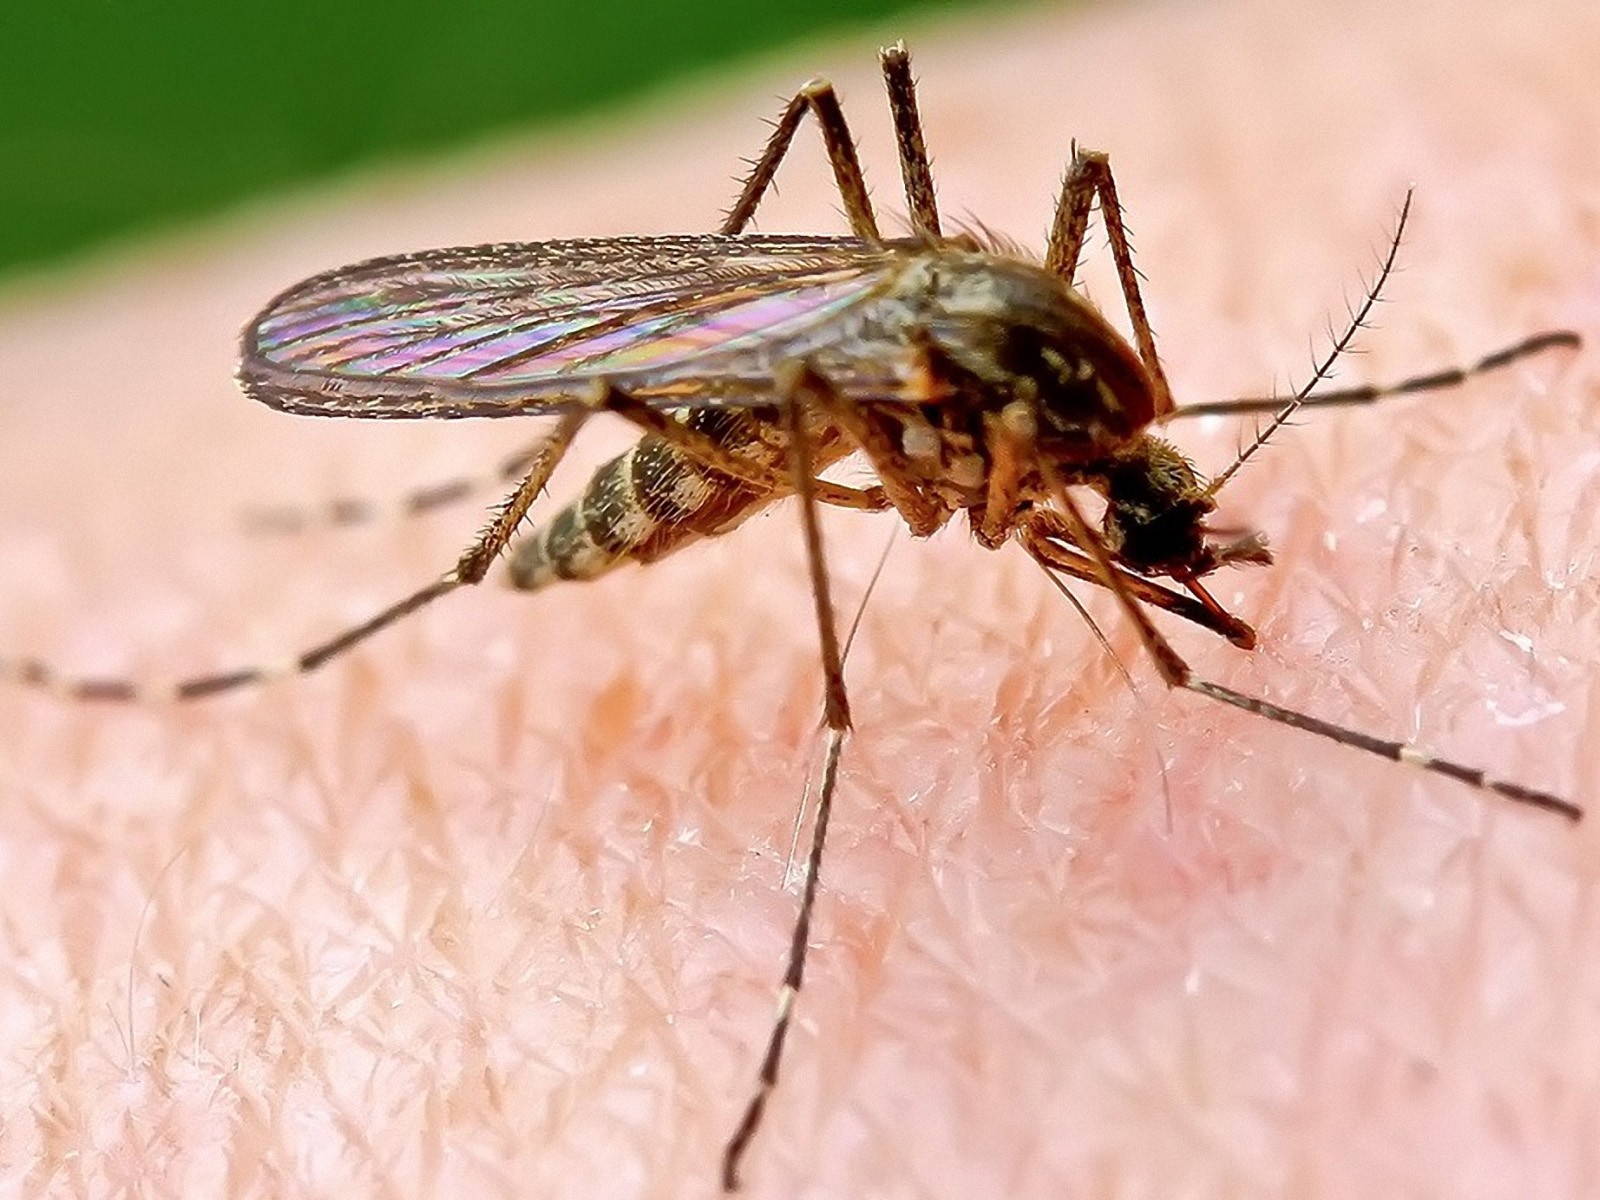 Culex Mosquito (Quinquefasciatus) • Small dark mosquito measuring from 0.2 – 0.4 inches in length • Prefer warm wet habitats • Lays eggs on water’s surface • Typically feeds on birds • Seek blood meals at dawn and dusk • Carriers of various diseases to include West Nile